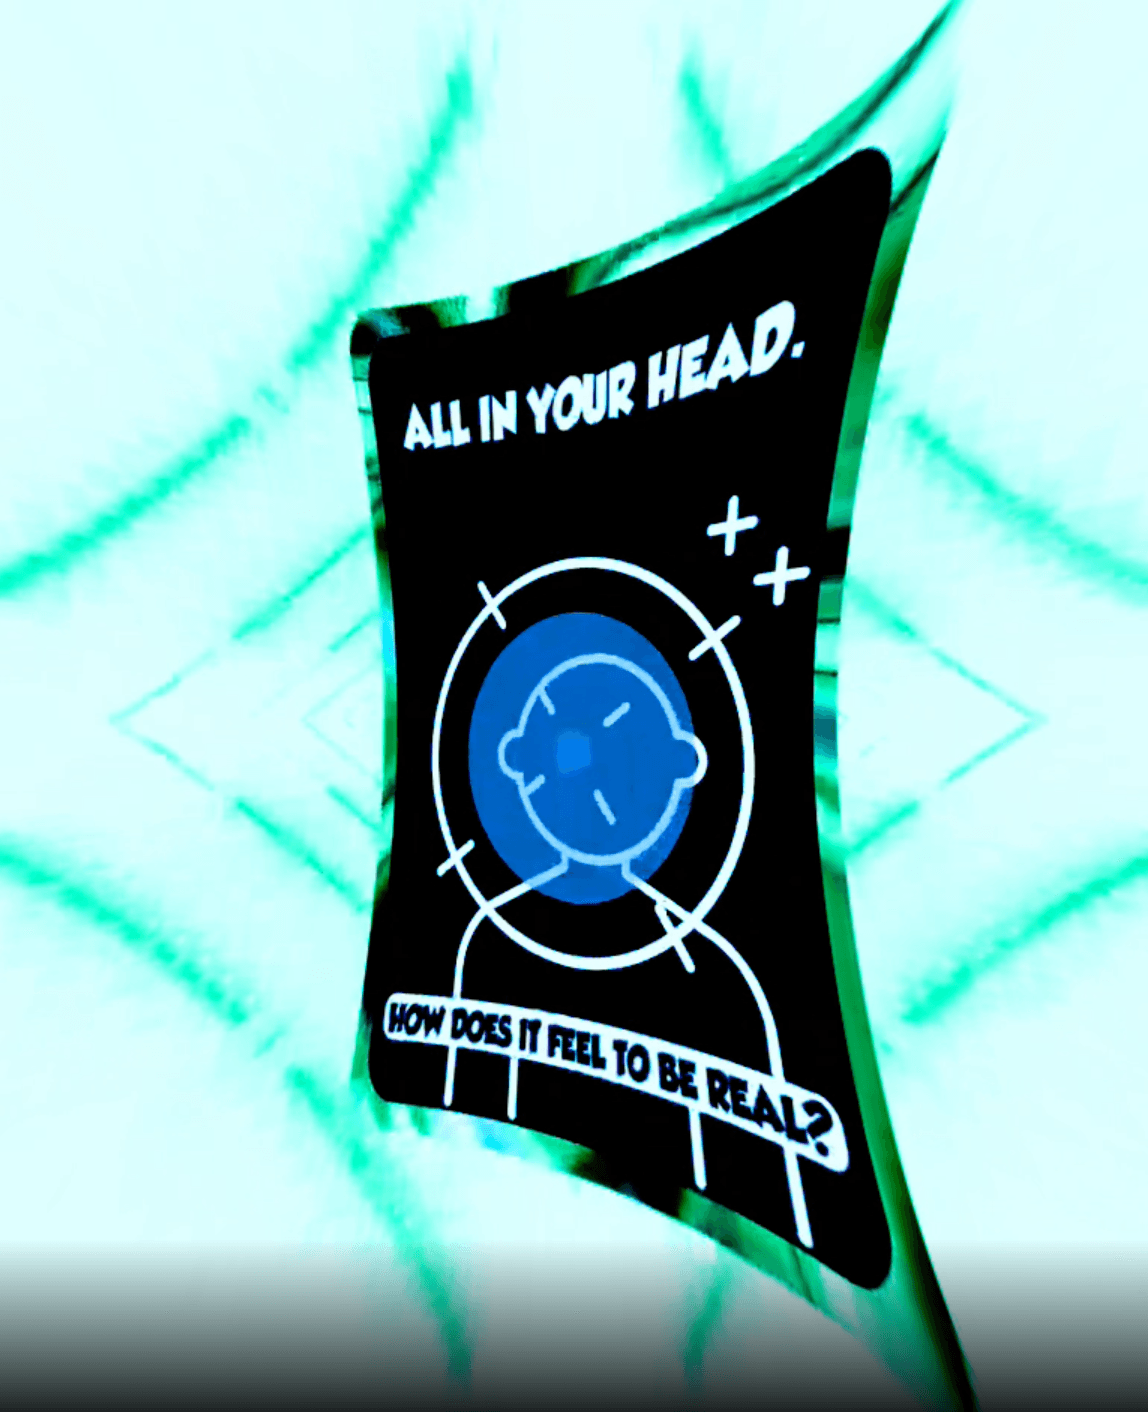 All in your head "How does it feel to be real?" "Bleen" Dez Cible collectible card